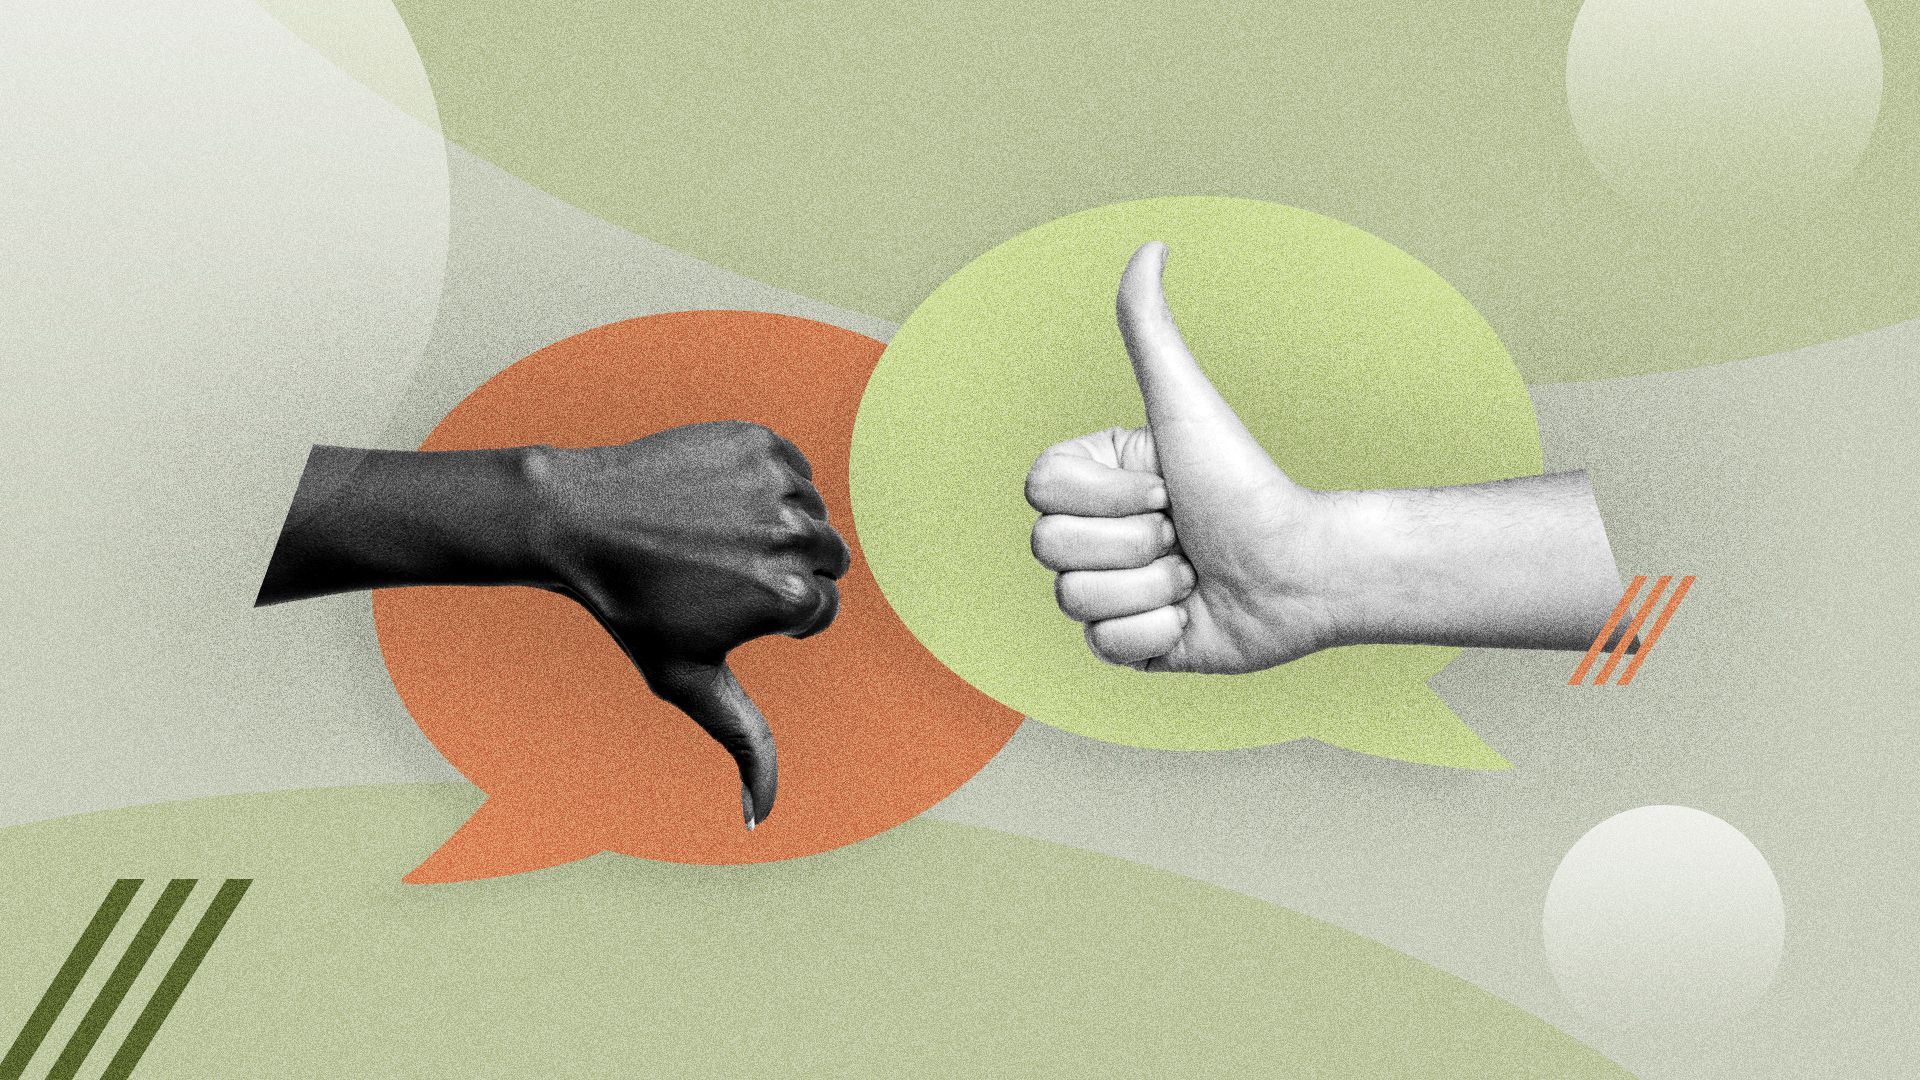 Illustration of two speech bubbles, one with a thumb pointing up, and one with a thumb pointing down, surrounded by abstract shapes.